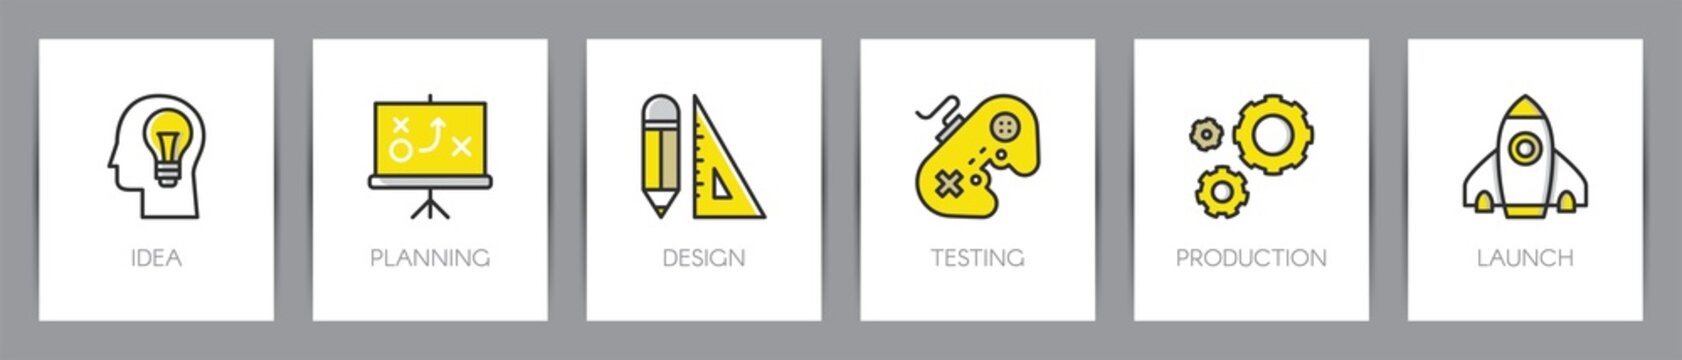 Business process. Startup concept. Web page template. Metaphors with icons.